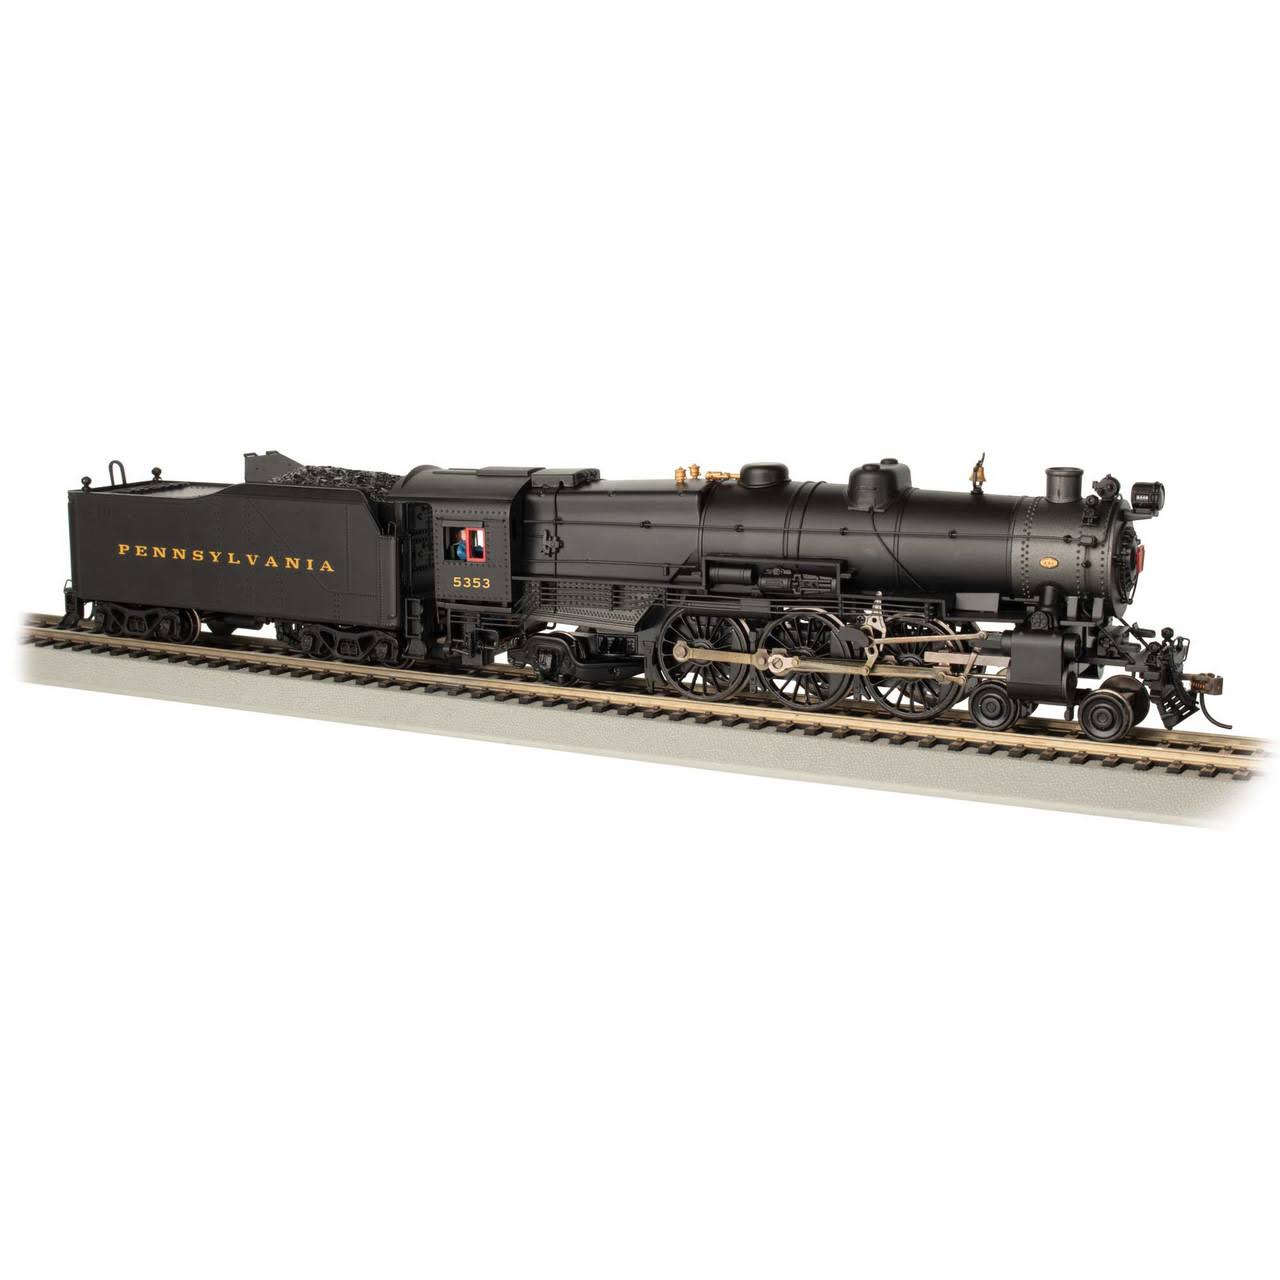 Bachmann Trains - K4 4-6-2 Pacific - DCC Wowsound Equipped Locomotive - PRR #612 Post-War with Modern Pilot - Ho Scale, Prototypical Colors (84407)